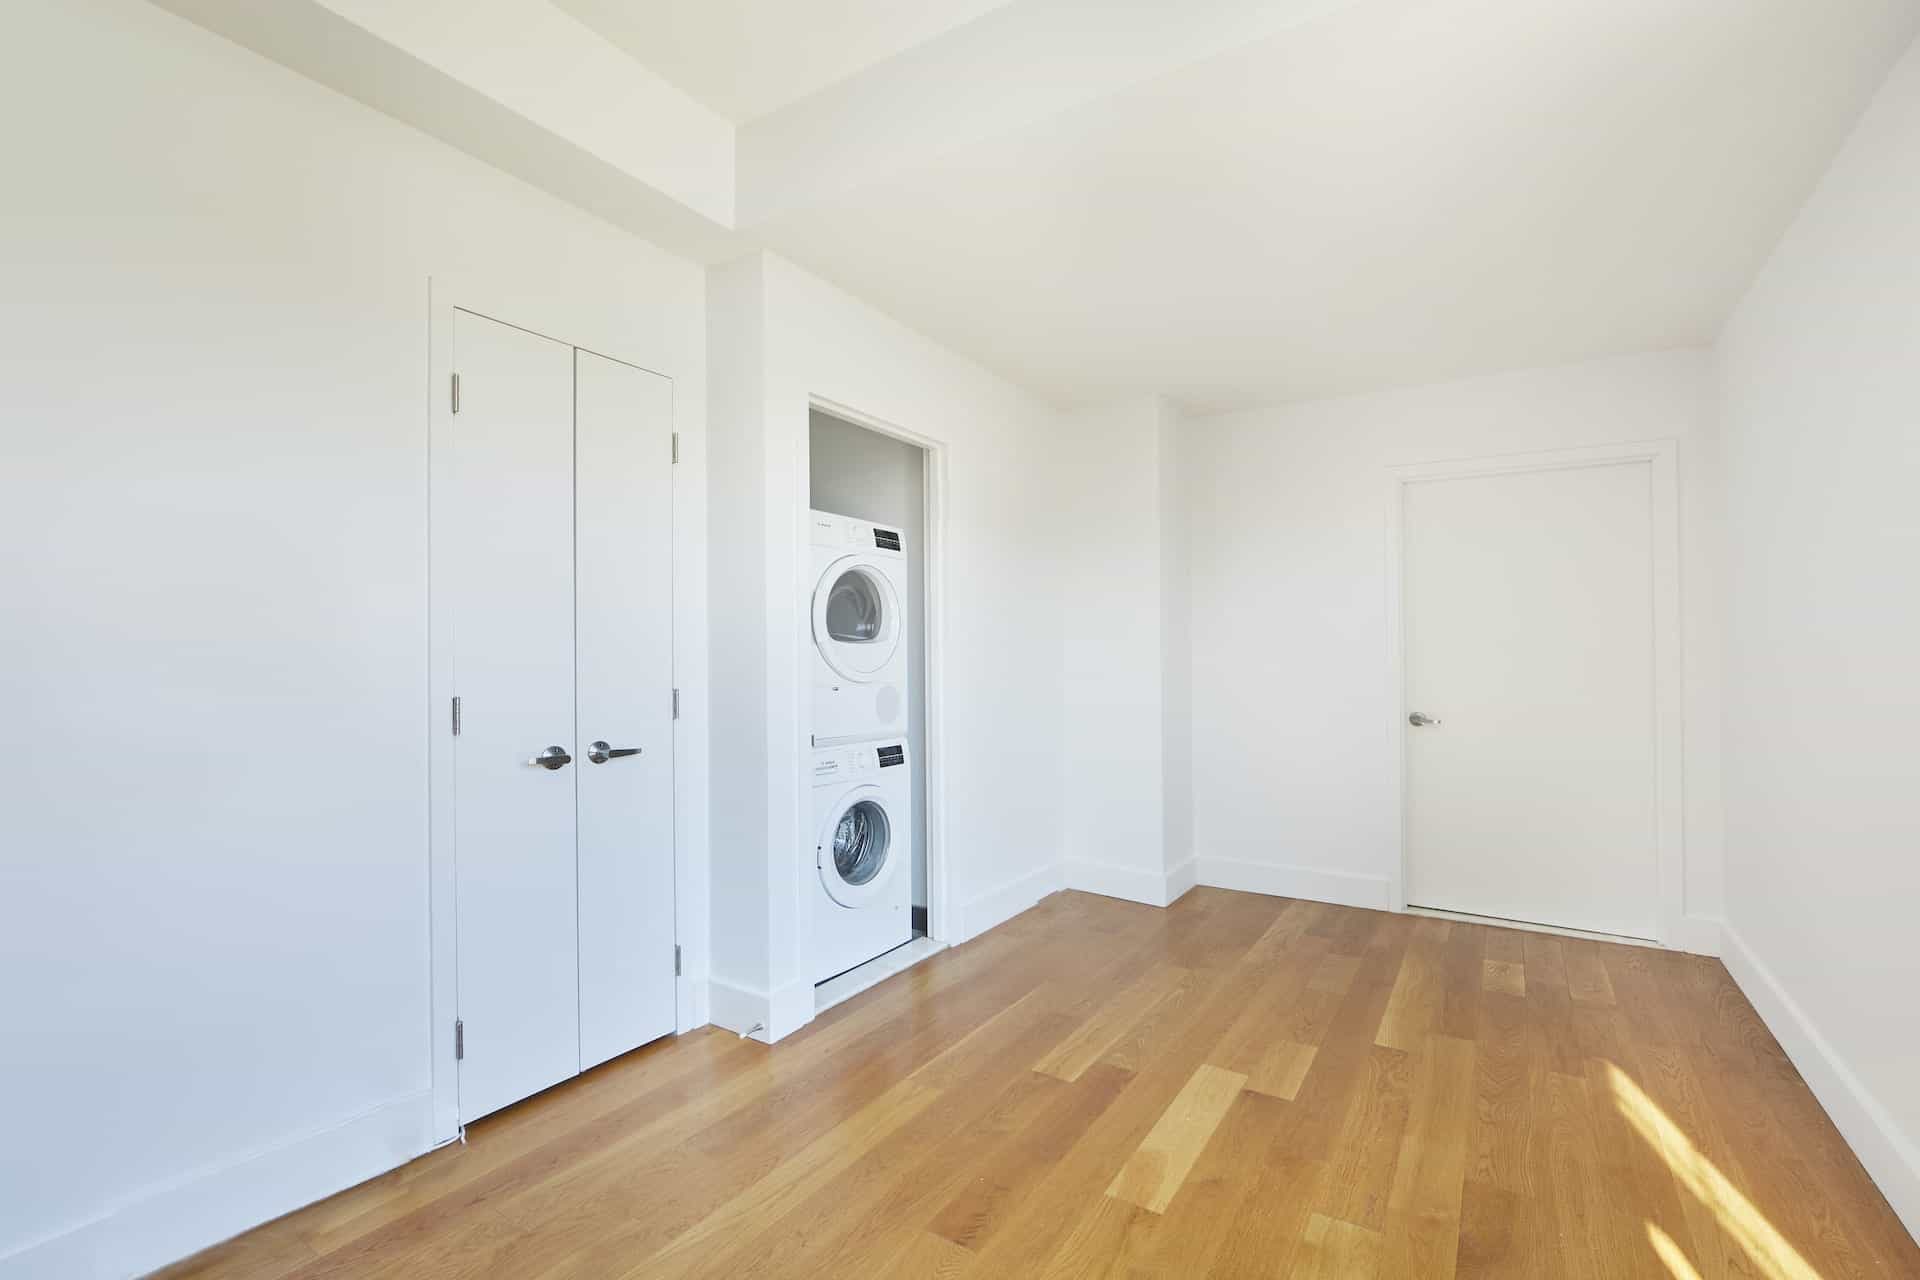 Apartment interior at 83 Bushwick Place in Brooklyn with hardwood floors, a closet, and stacking washer/dryer unit.